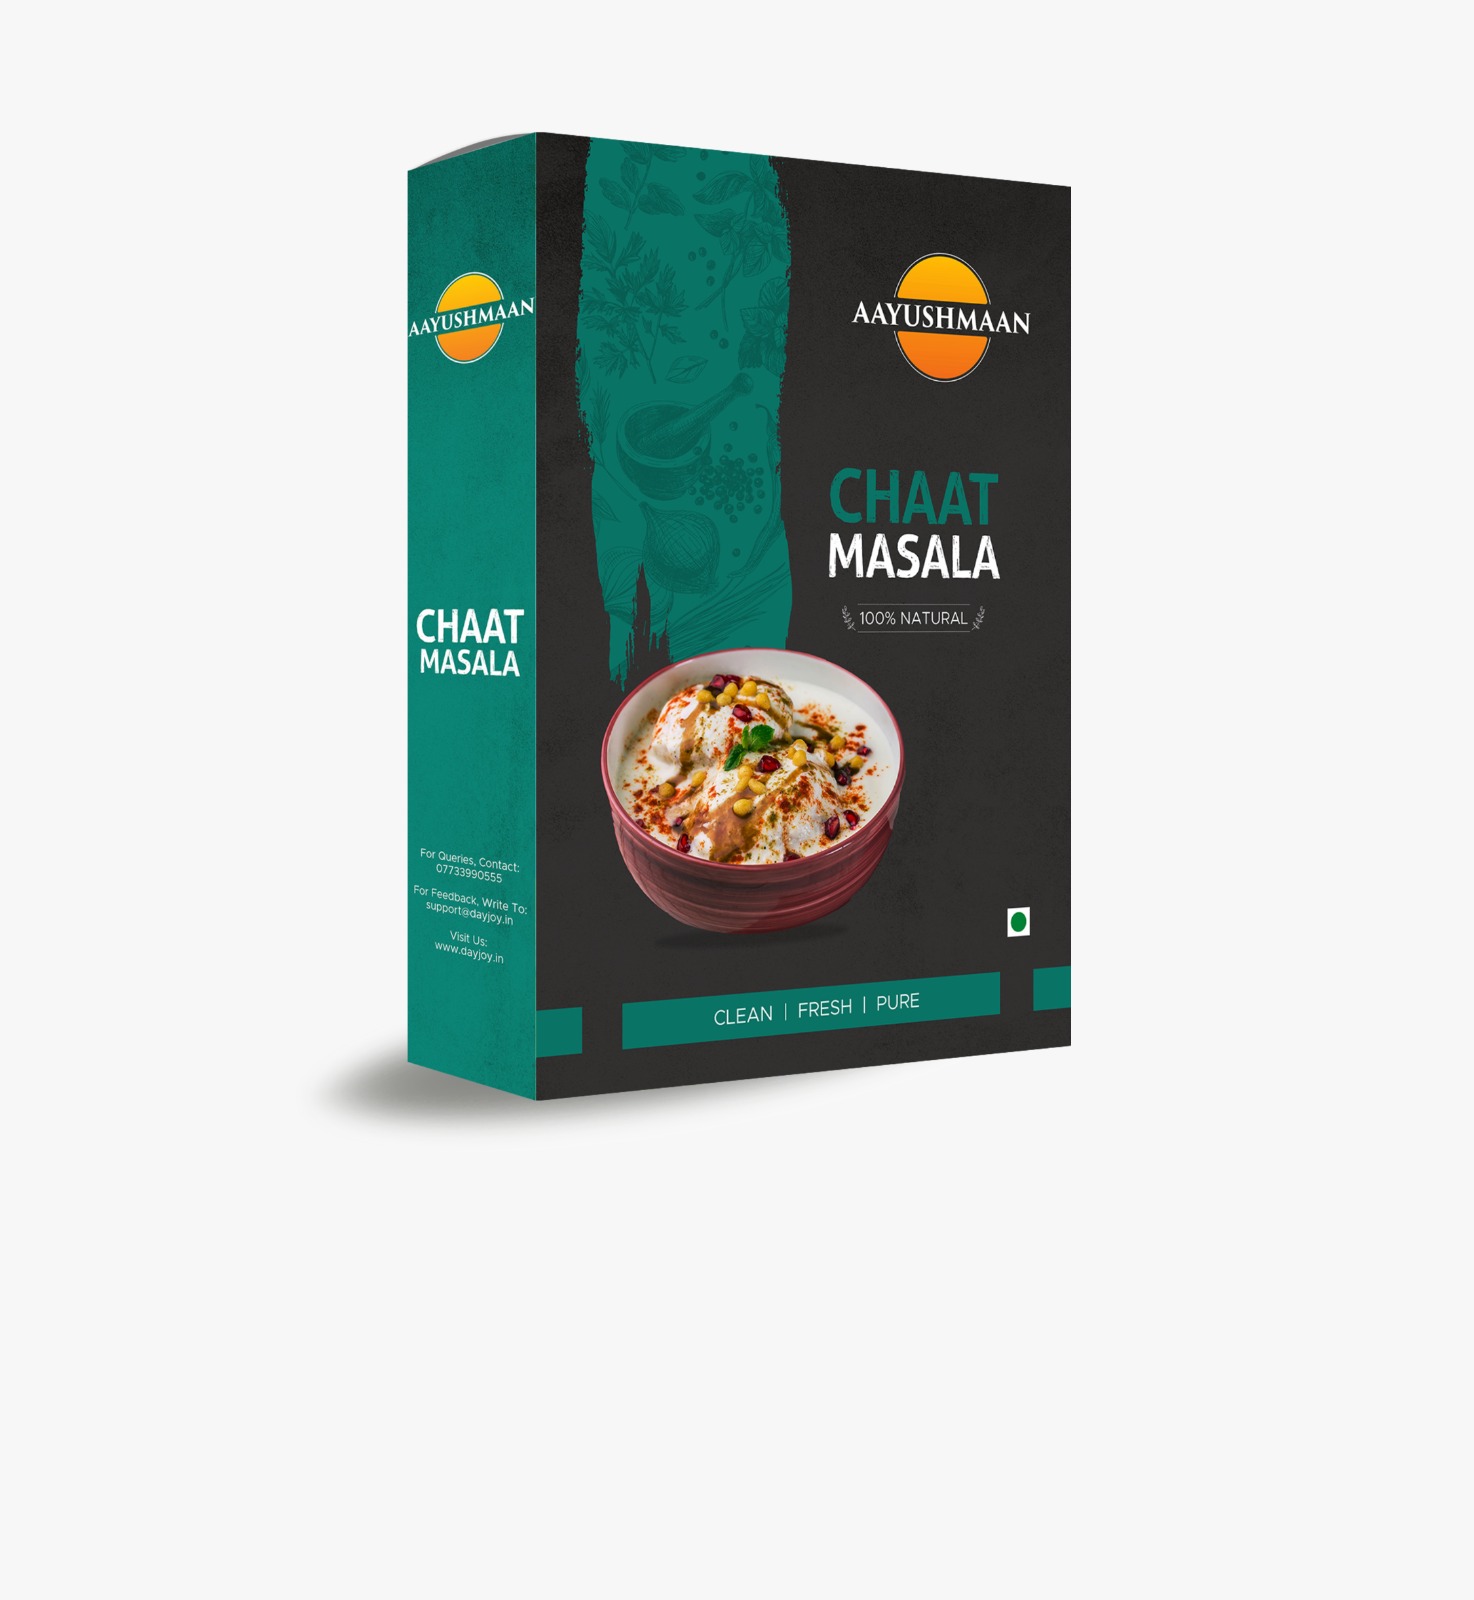 Aayushmaan Chaat Masala- a real touch of Indain spices